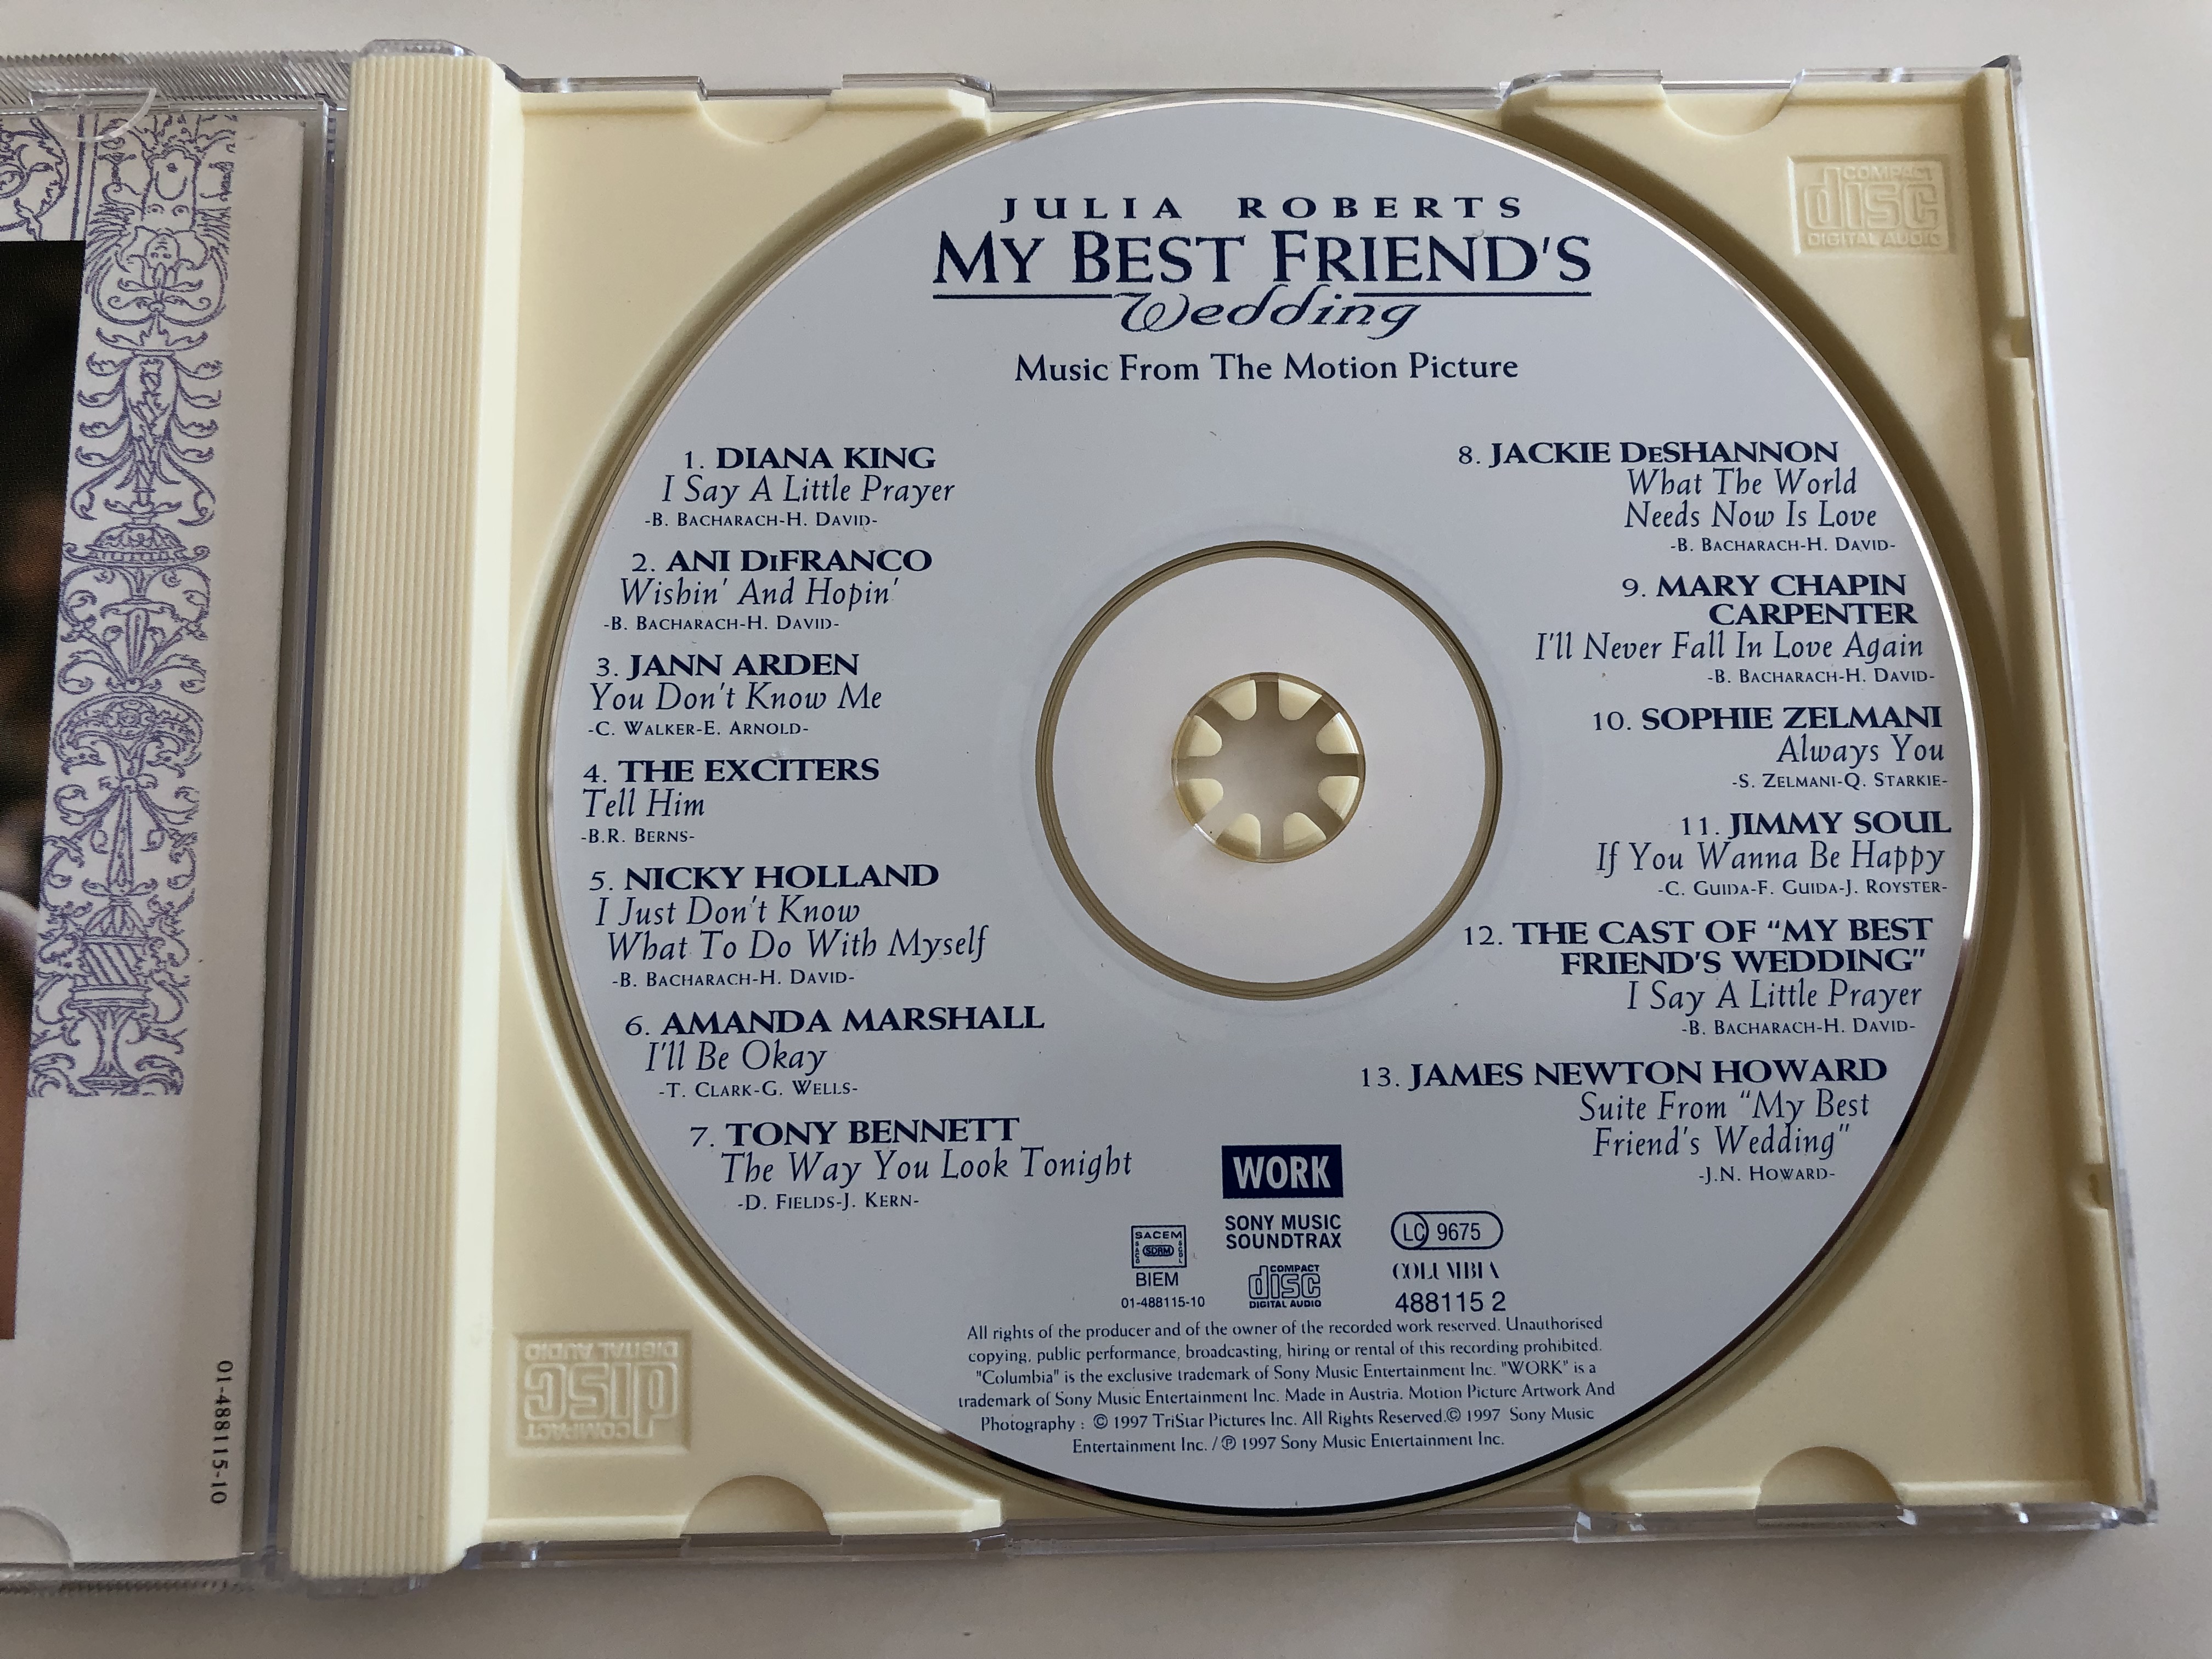 my-best-friend-s-wedding-julia-roberts-music-from-the-motion-picture-audio-cd-1997-columbia-wrk-488115-2-5-.jpg